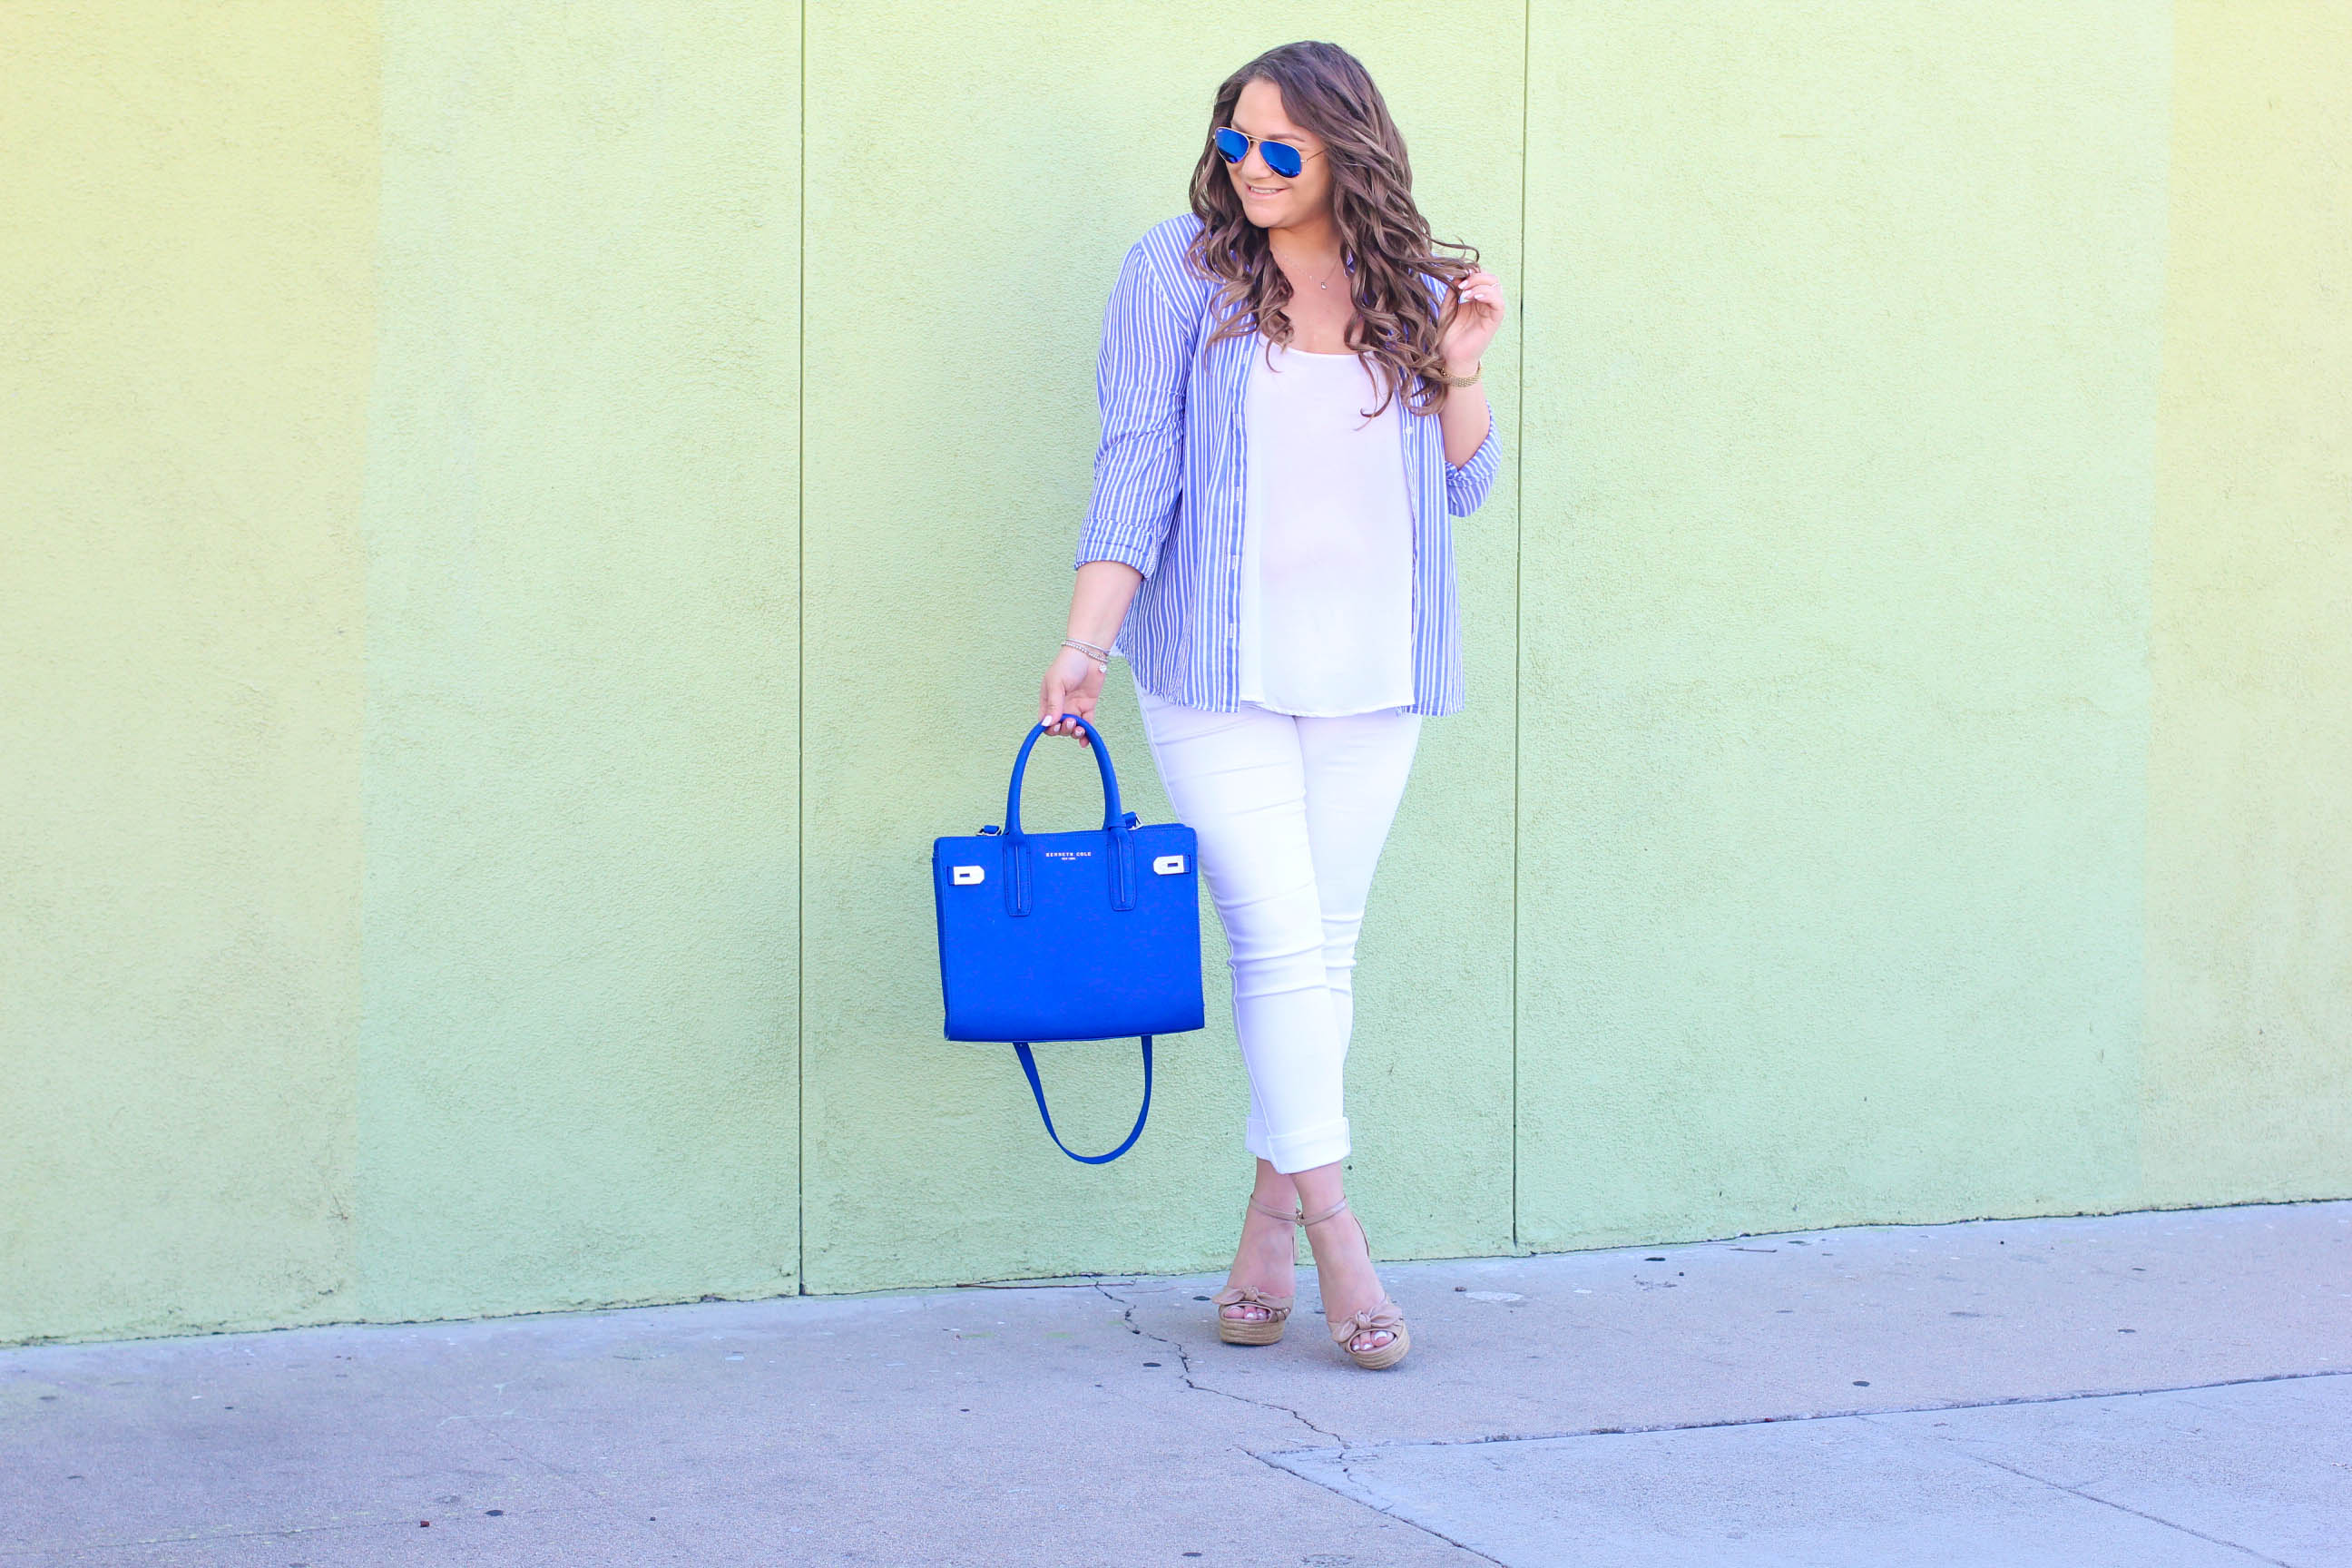 missyonmadison, melissa tierney, old navy, fashion blogger, spring style, spring trends, old navy style, fashion blogger, la blogger, neo nauticaul, nautical, white skinny jeans, white jeans, cobalt blue satchel, pin stripe shirt, striped button down, style blogger, espadrille wedges, style goals, old navy rockstar jeans, 